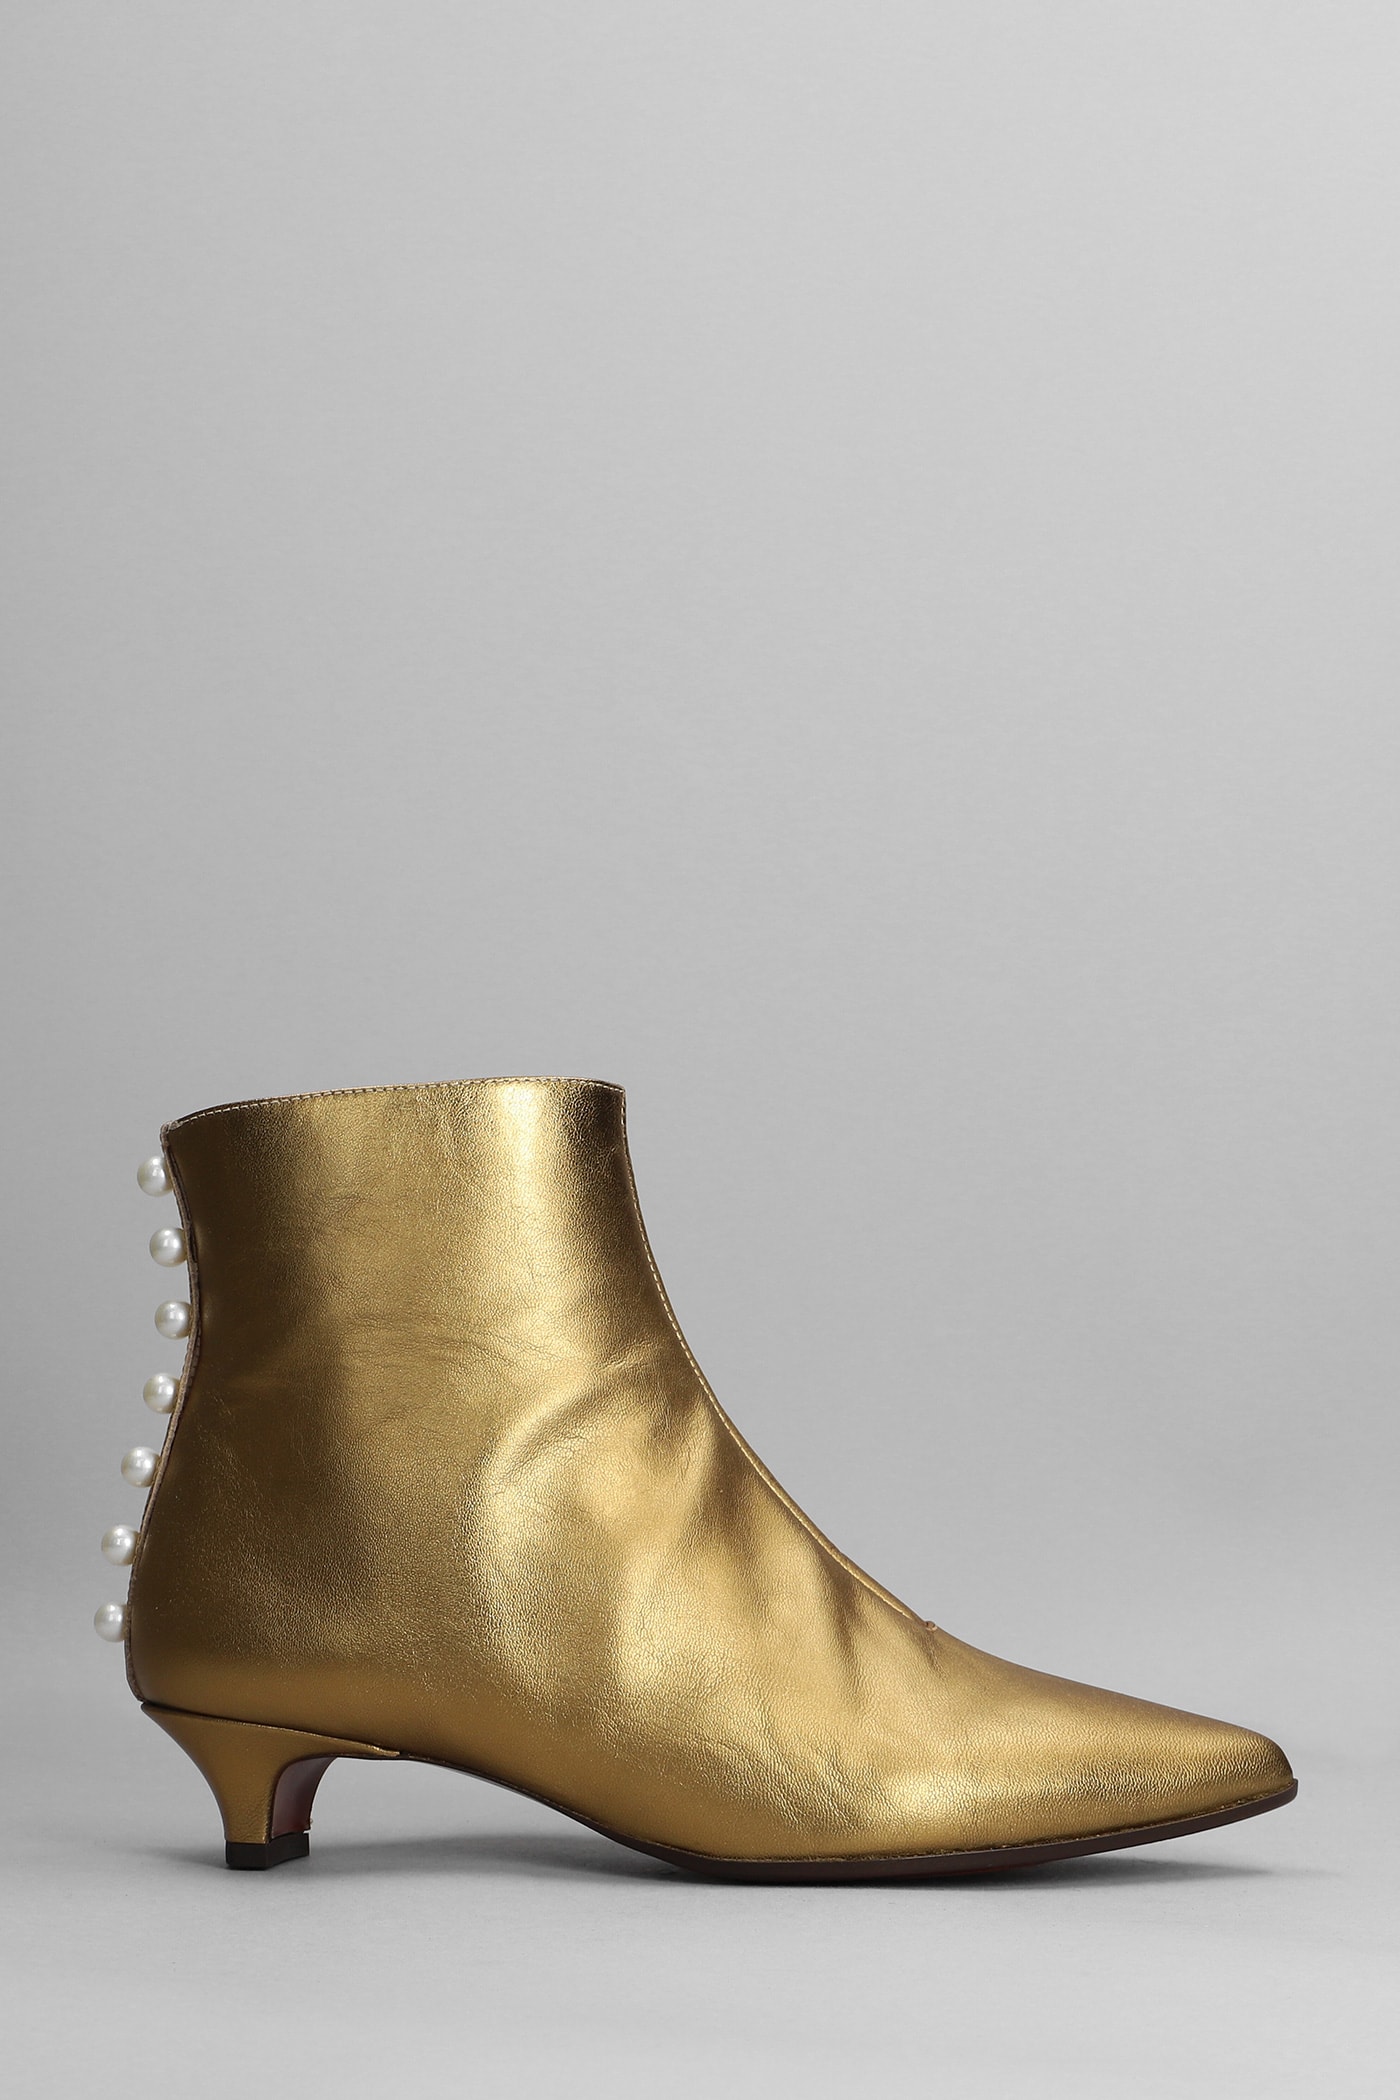 Chie Mihara Joki High Heels Ankle Boots In Bronze Leather